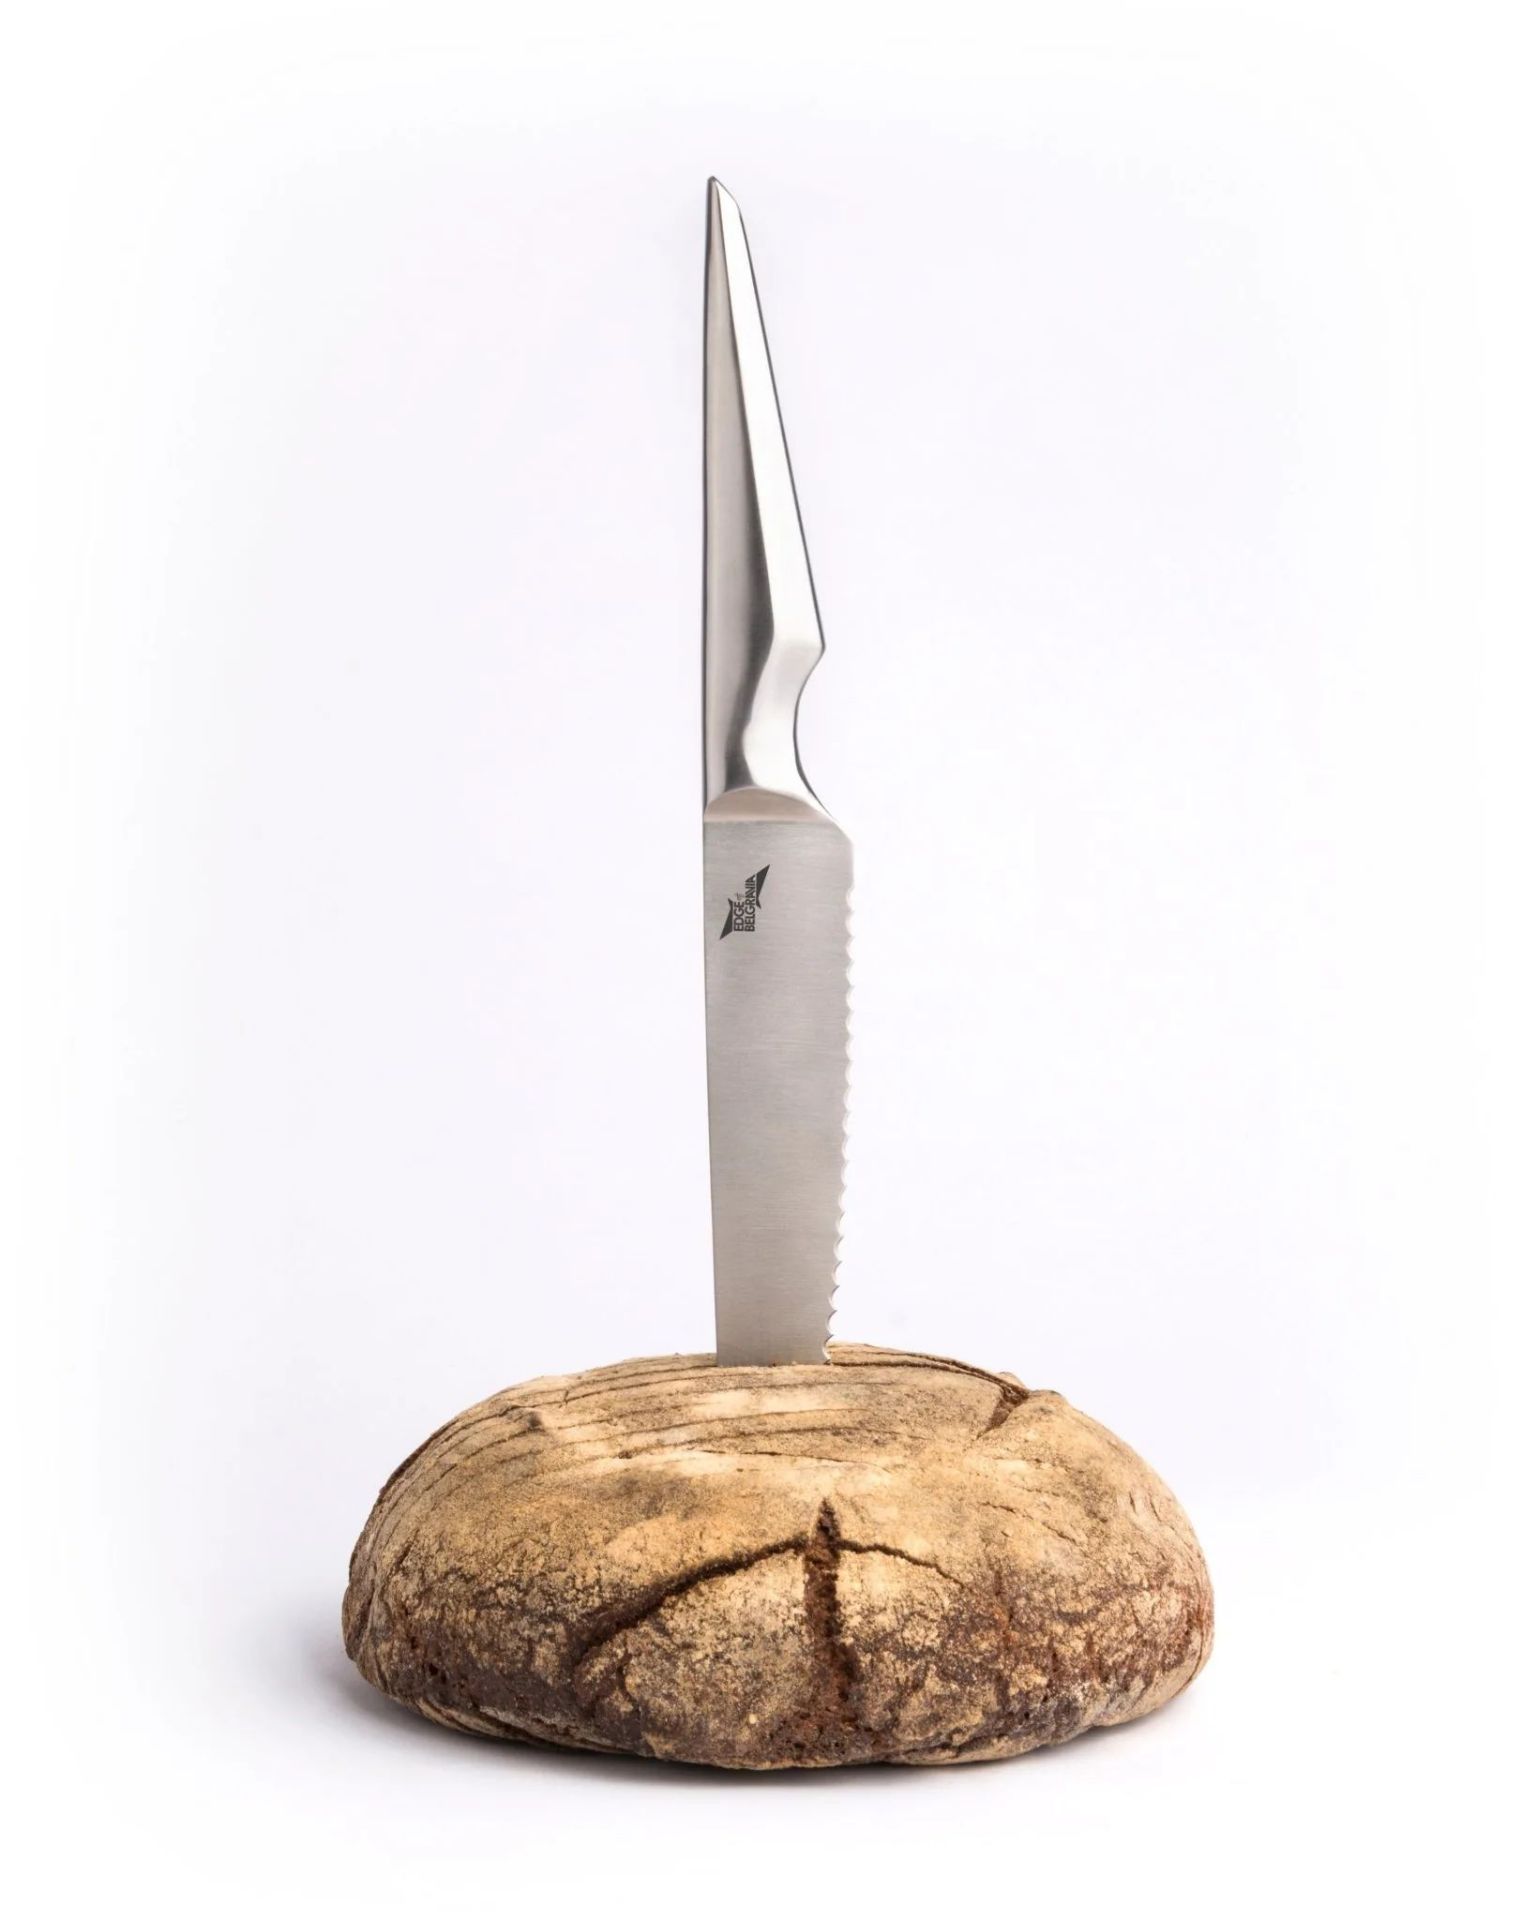 10 X BRAND NEW EDGE OF BELGRAVIA ARONDIGHT BREAD KNIFE (7.5" | 19CM) RRP £29 EACH (007A). - Image 3 of 3